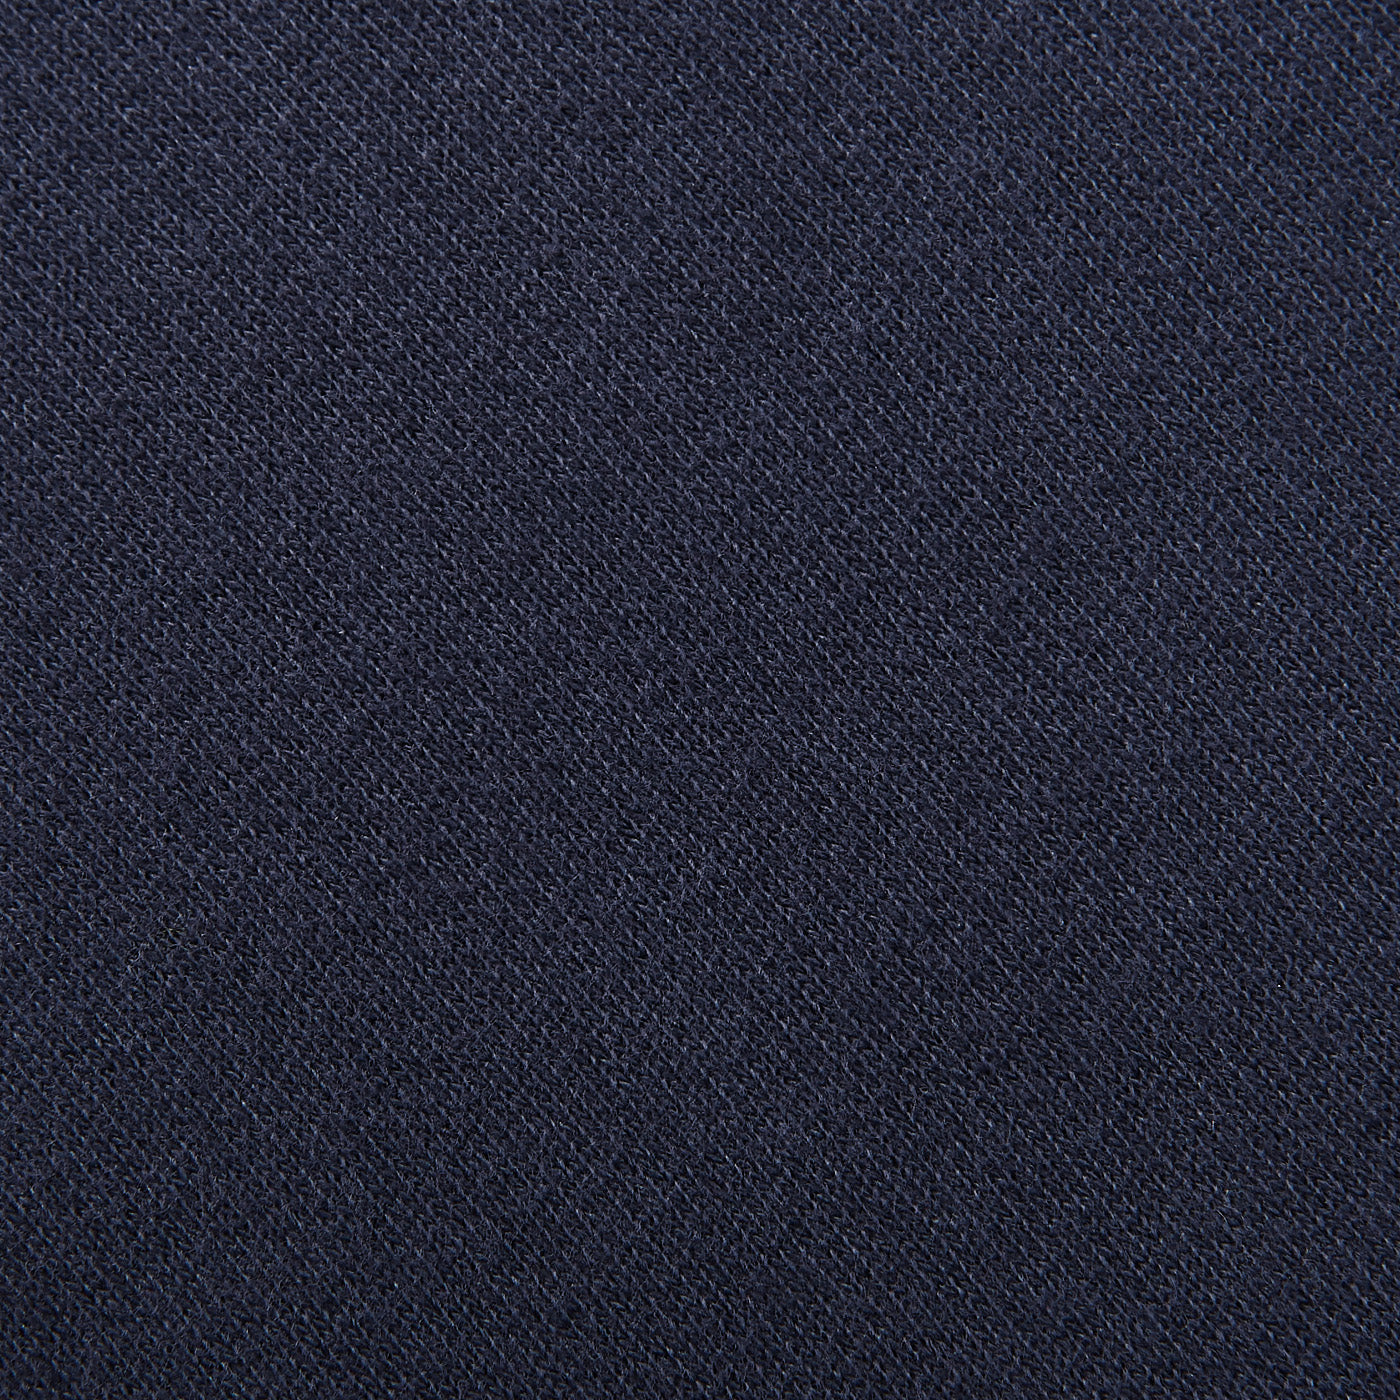 Sunspel Washed Blue Cotton Loopback Sweater Fabric